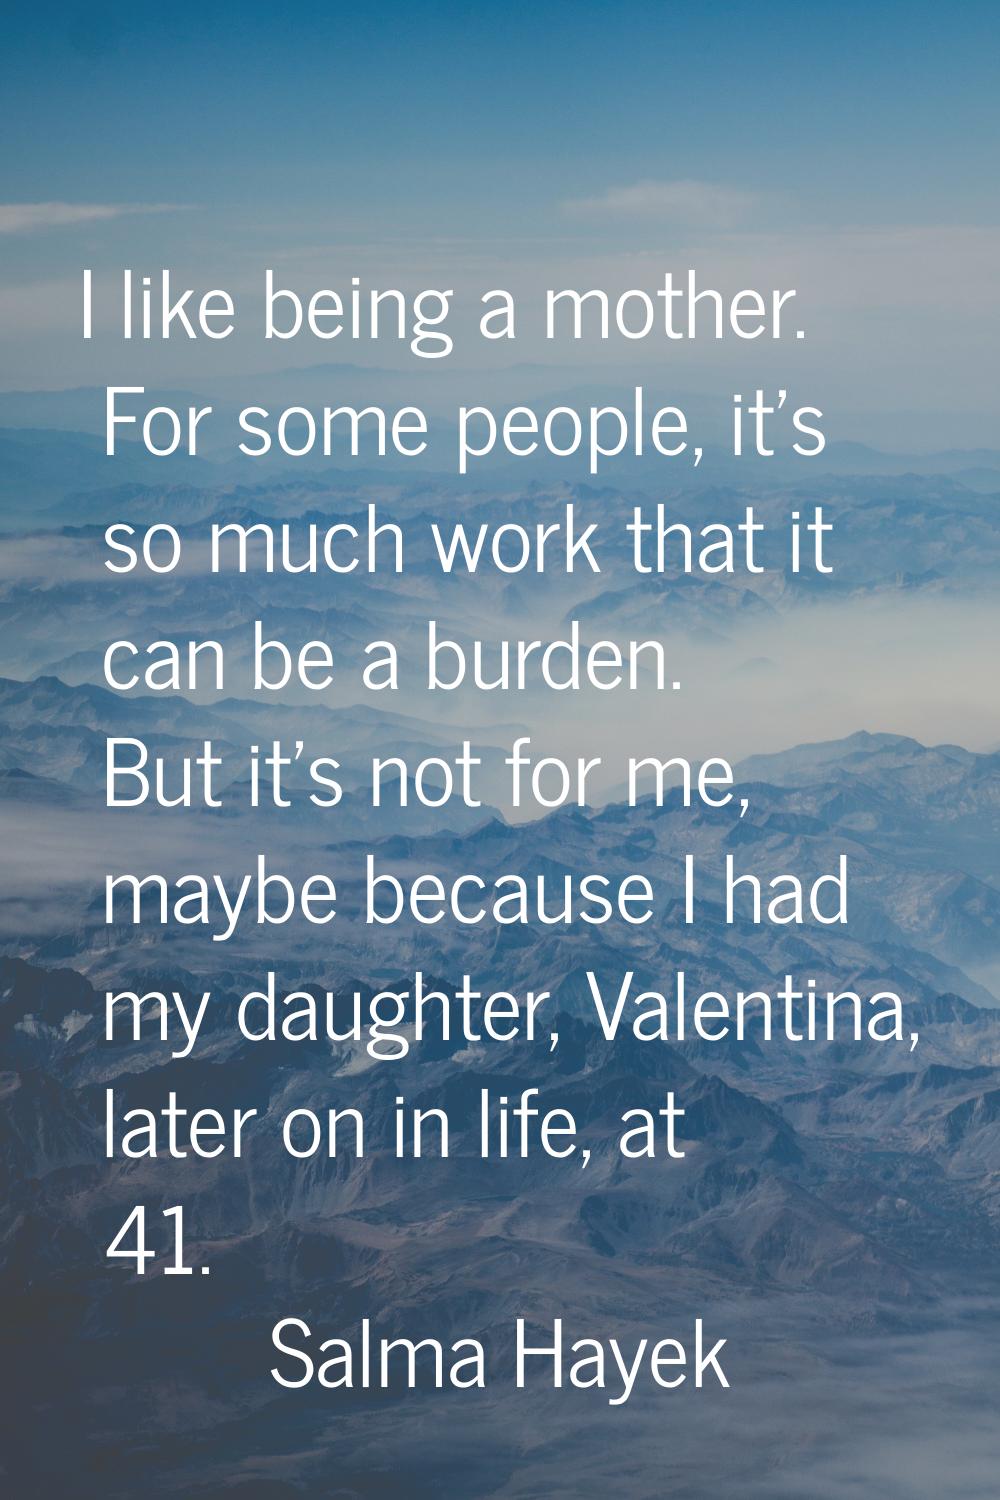 I like being a mother. For some people, it's so much work that it can be a burden. But it's not for